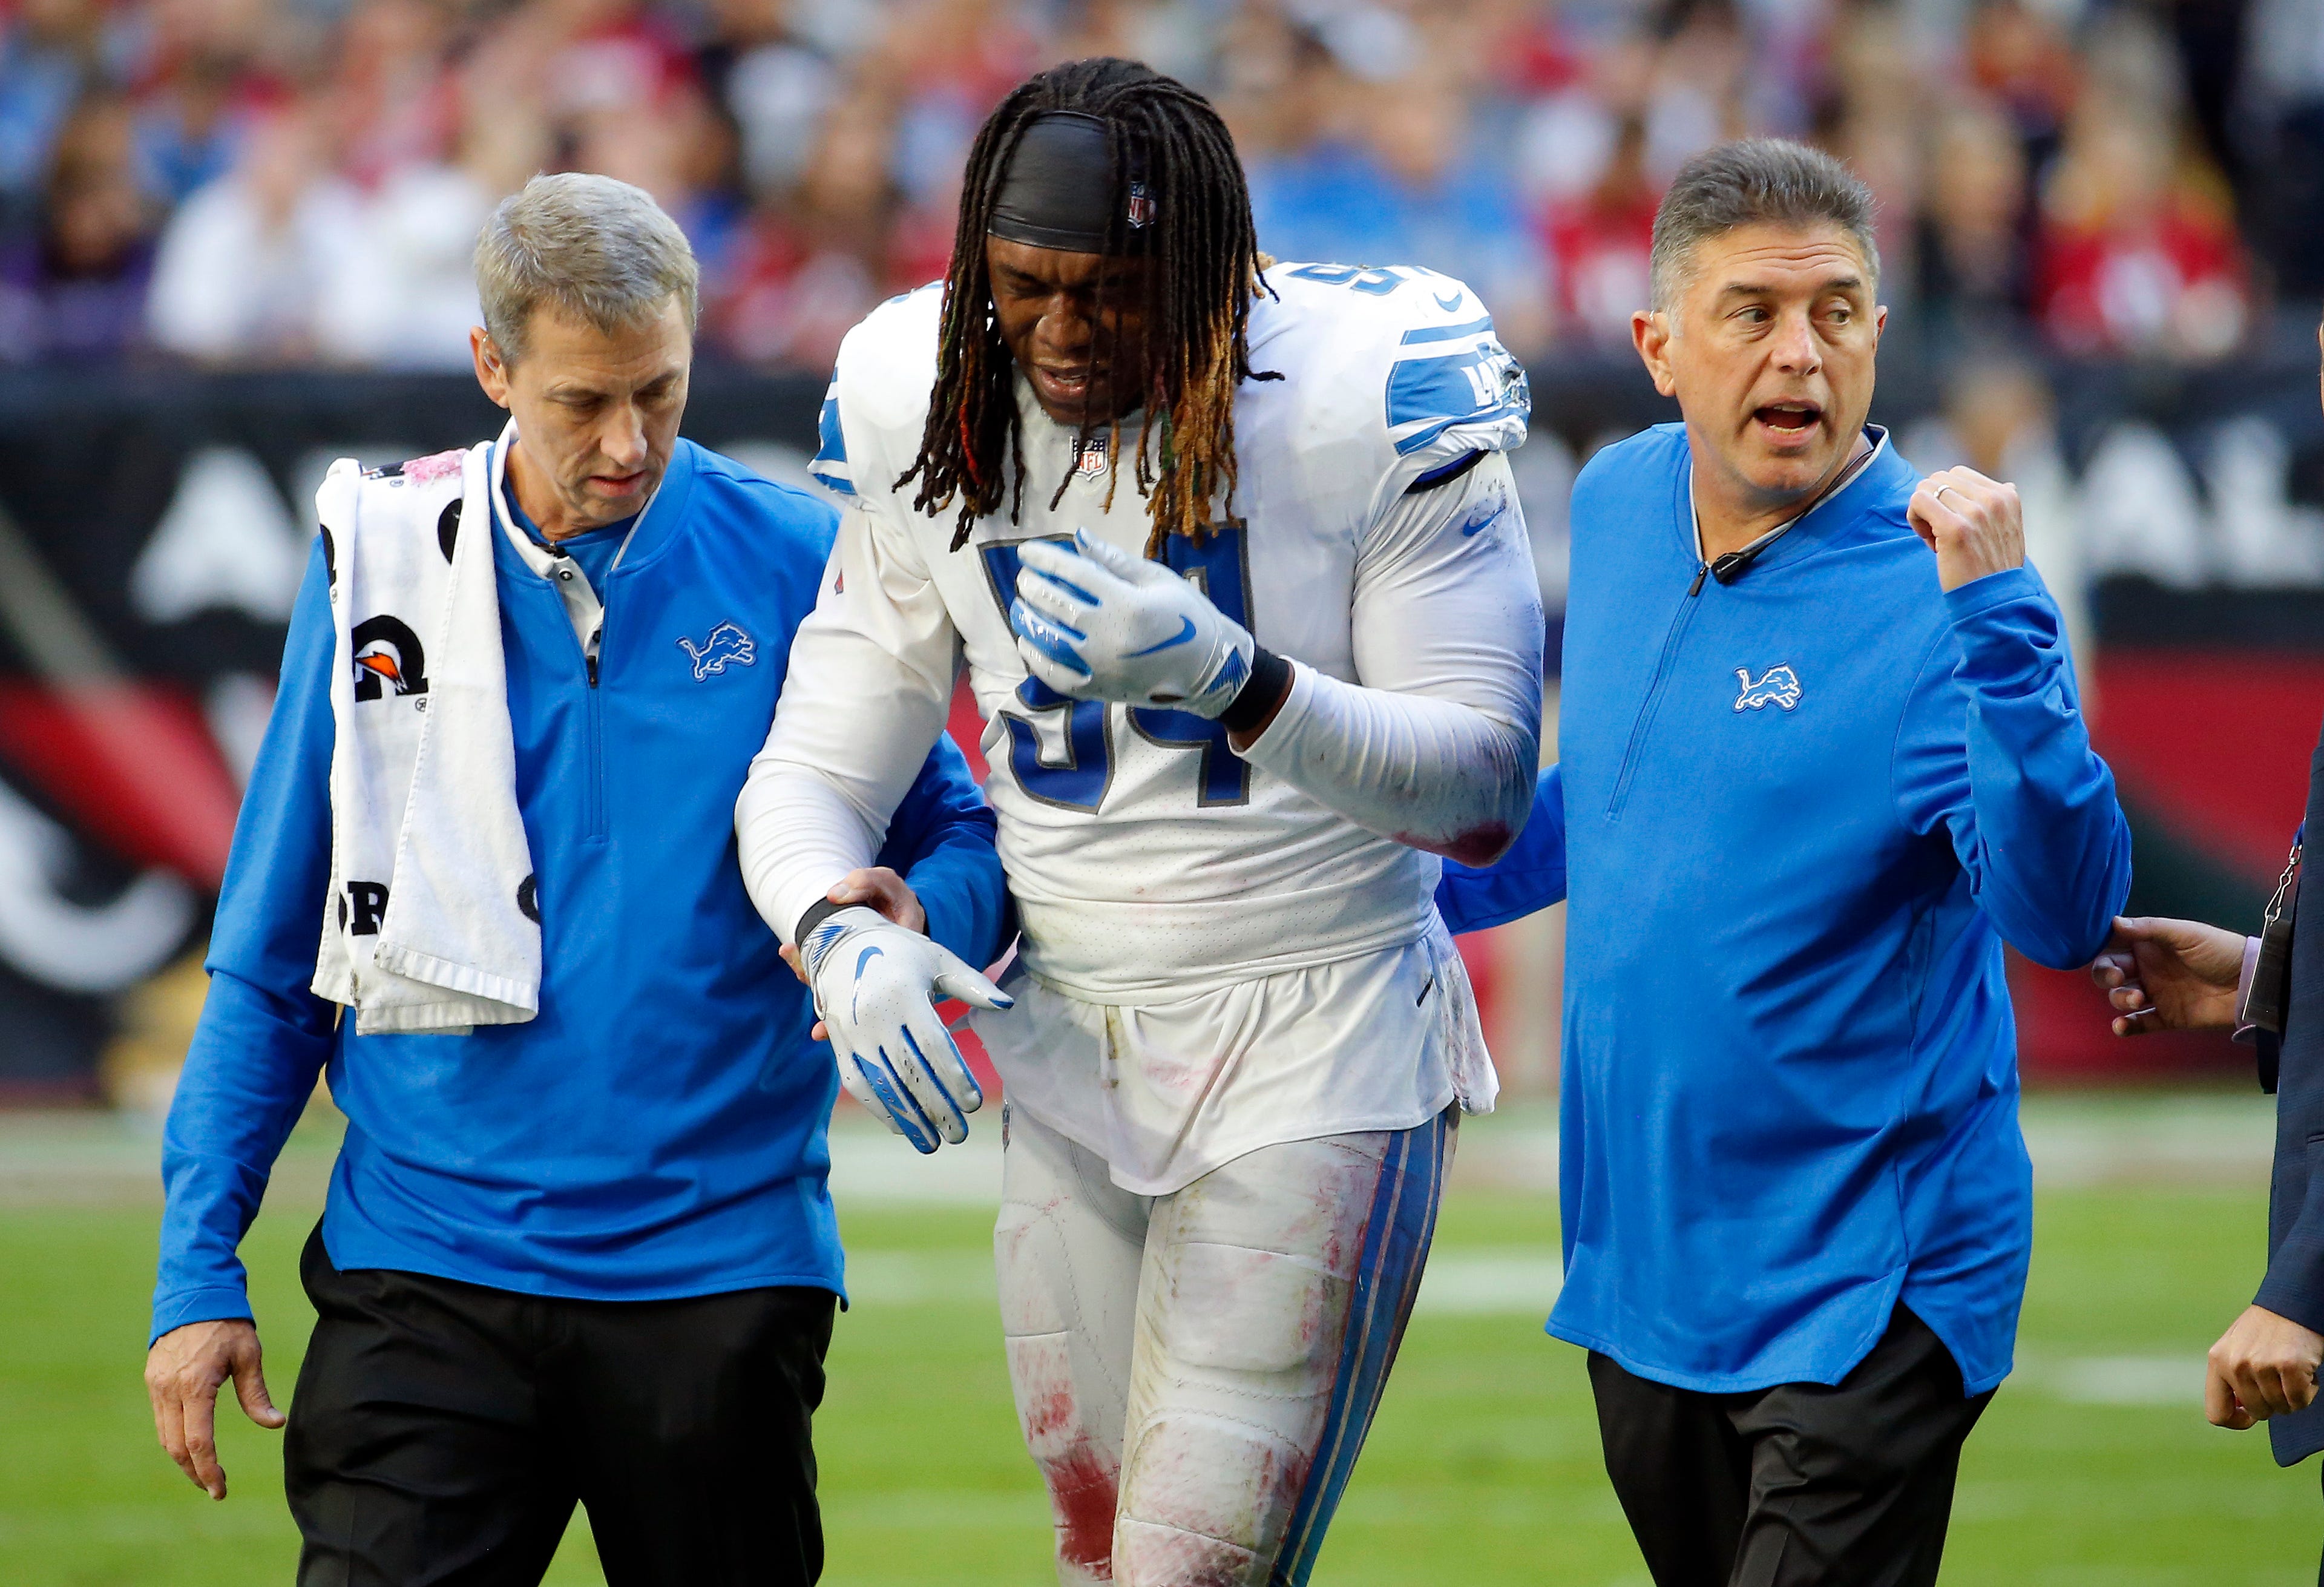 Detroit Lions may have seen last of Ziggy Ansah. Which is a bummer